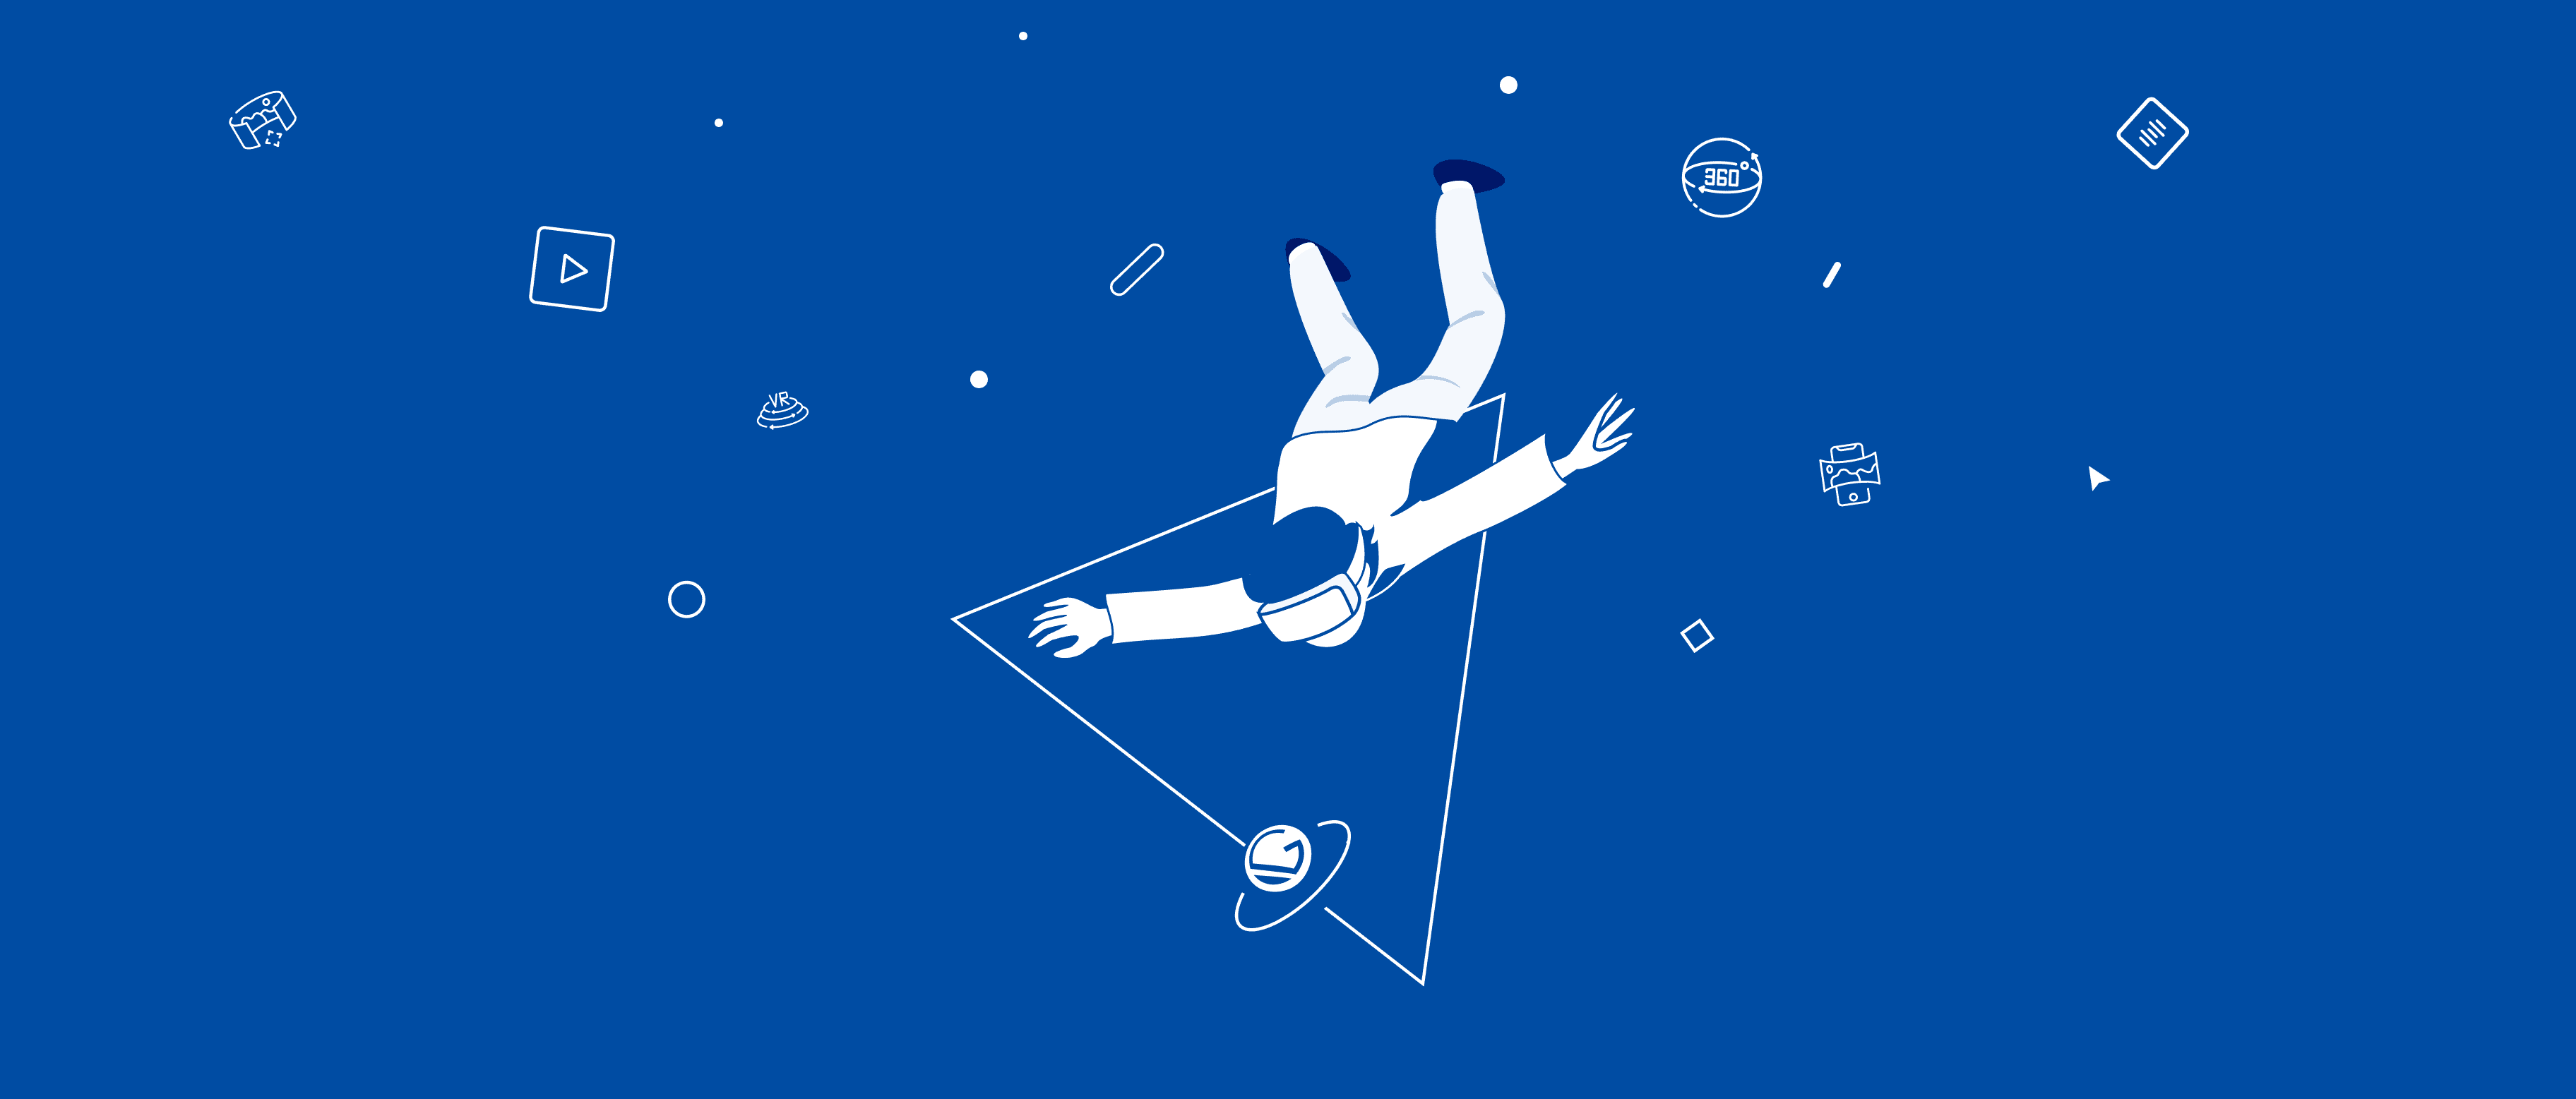 Illustration of person wearing VR goggles falling through space